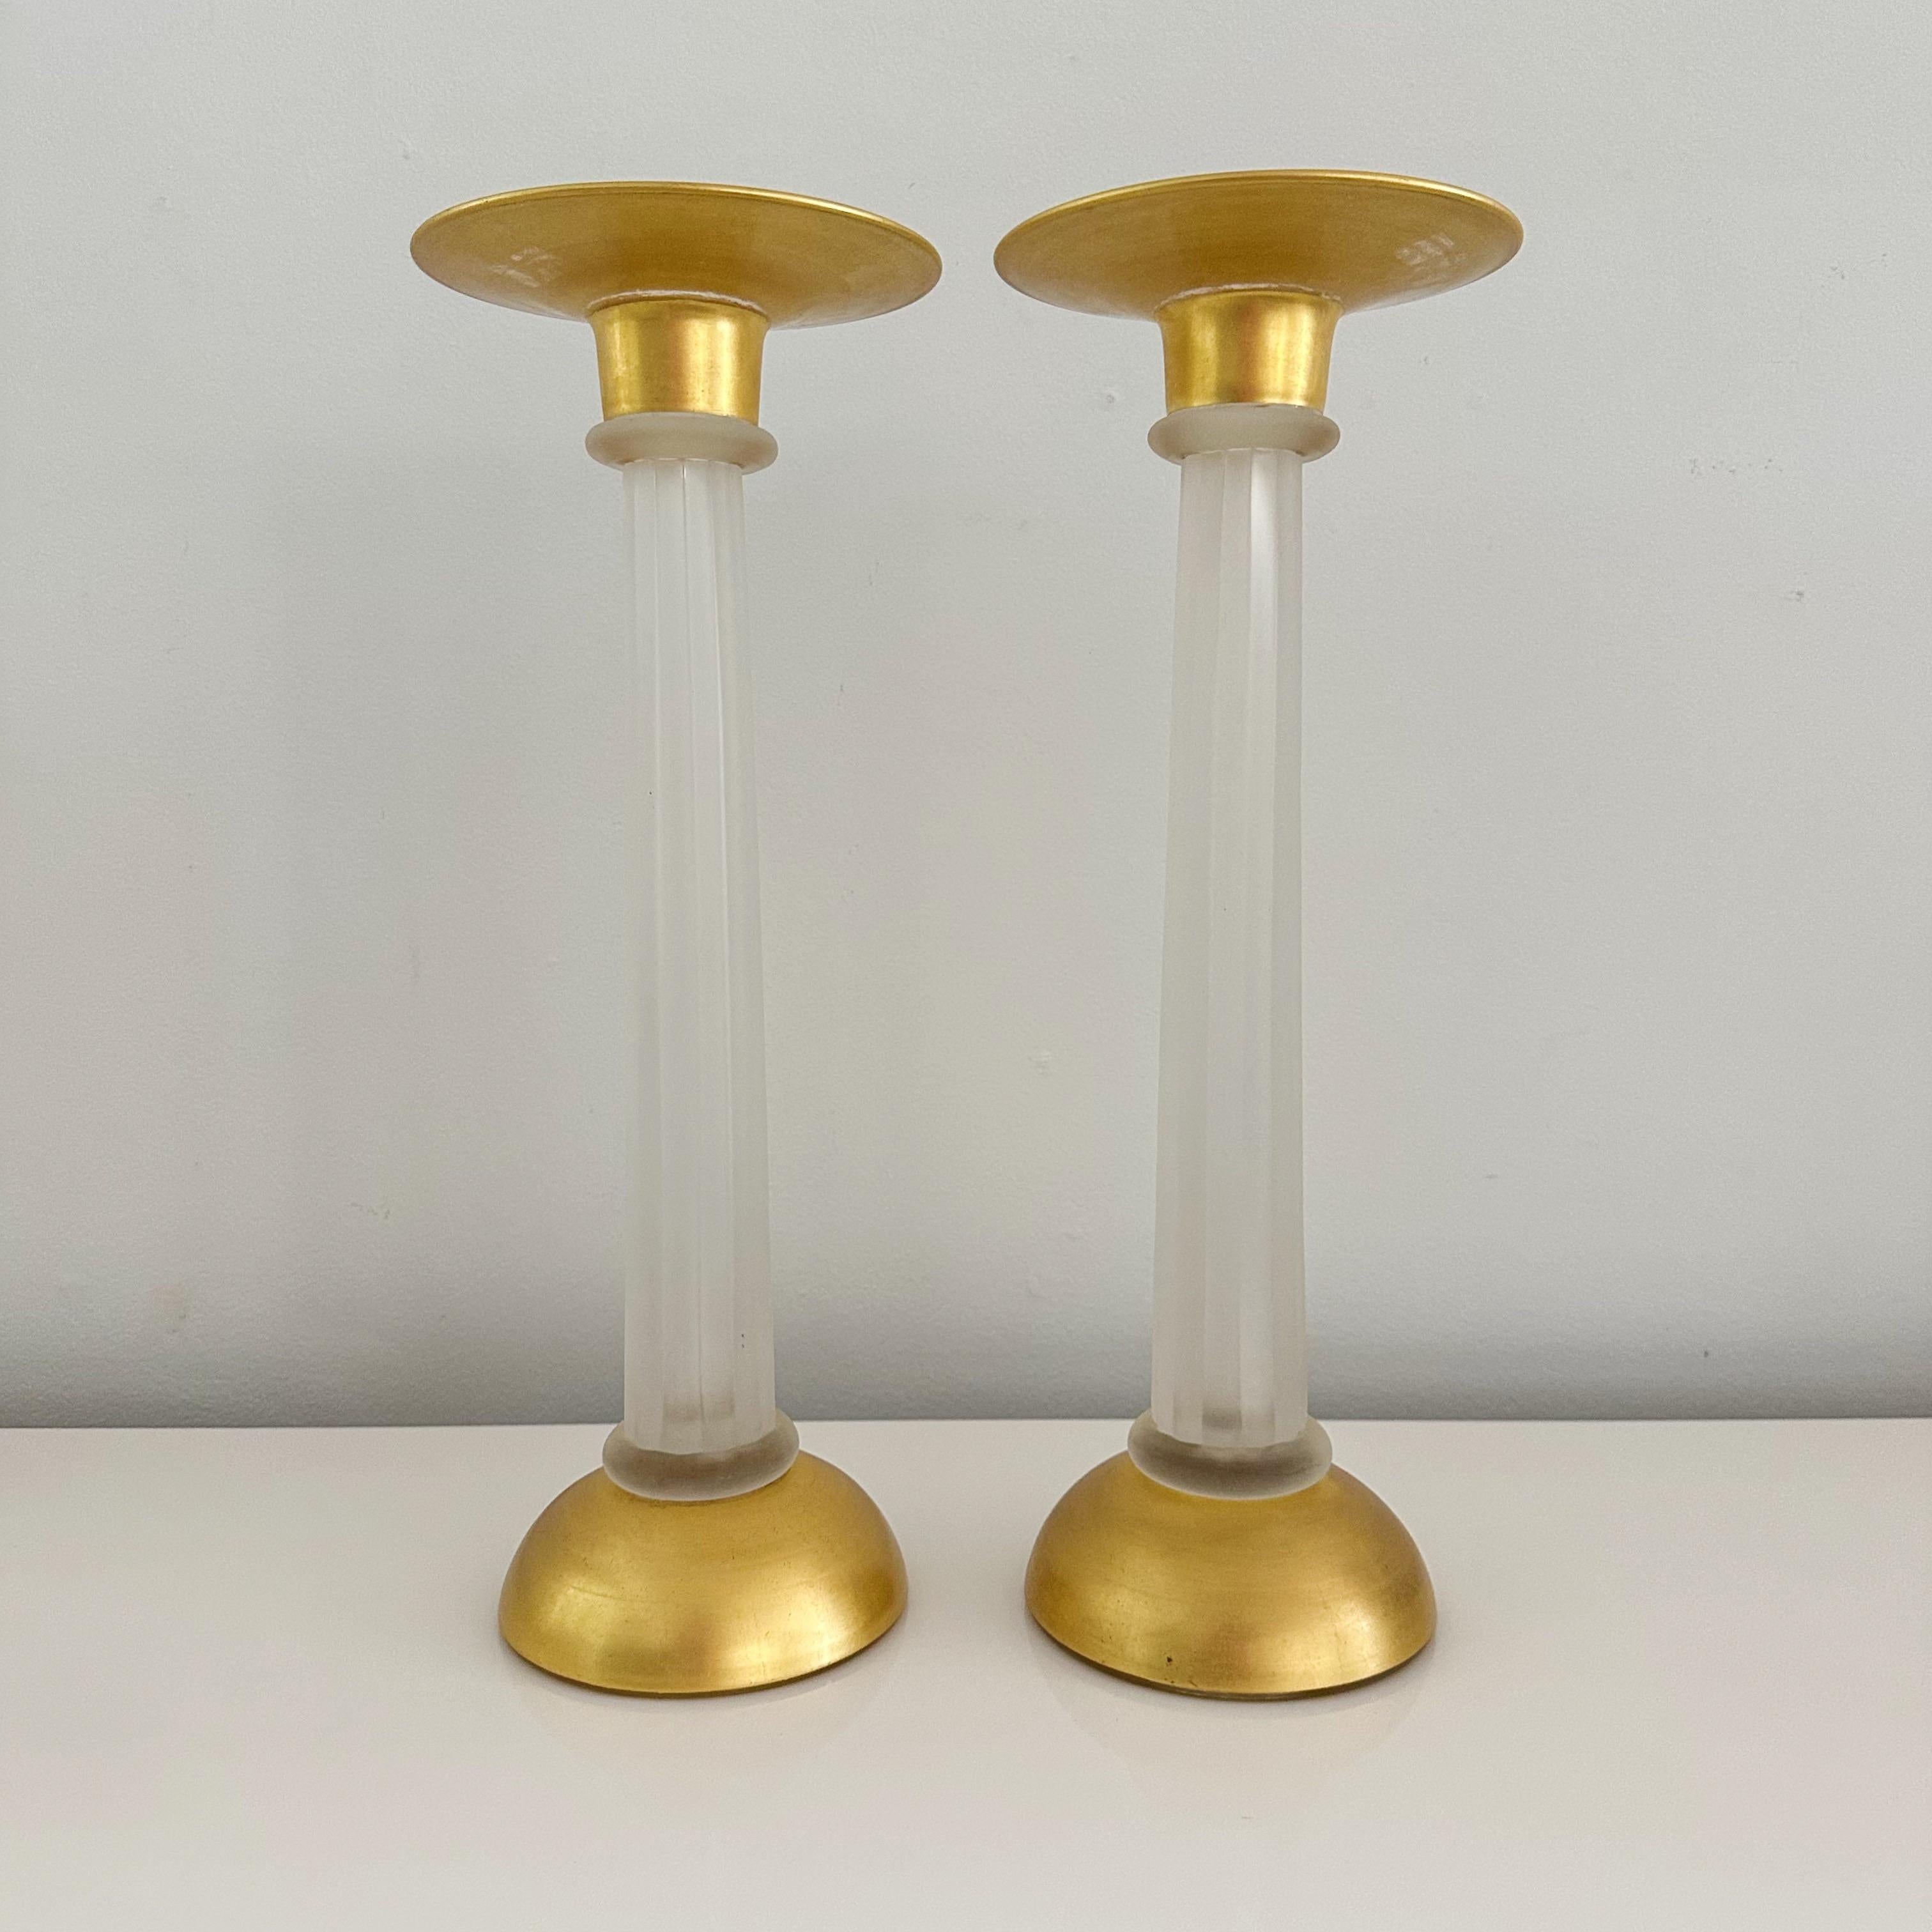 This pair of tall Murano glass candle holders features translucent fluted stems with exquisite gold leaf tops and bottoms. Each piece is signed on the base with the distinguished name 